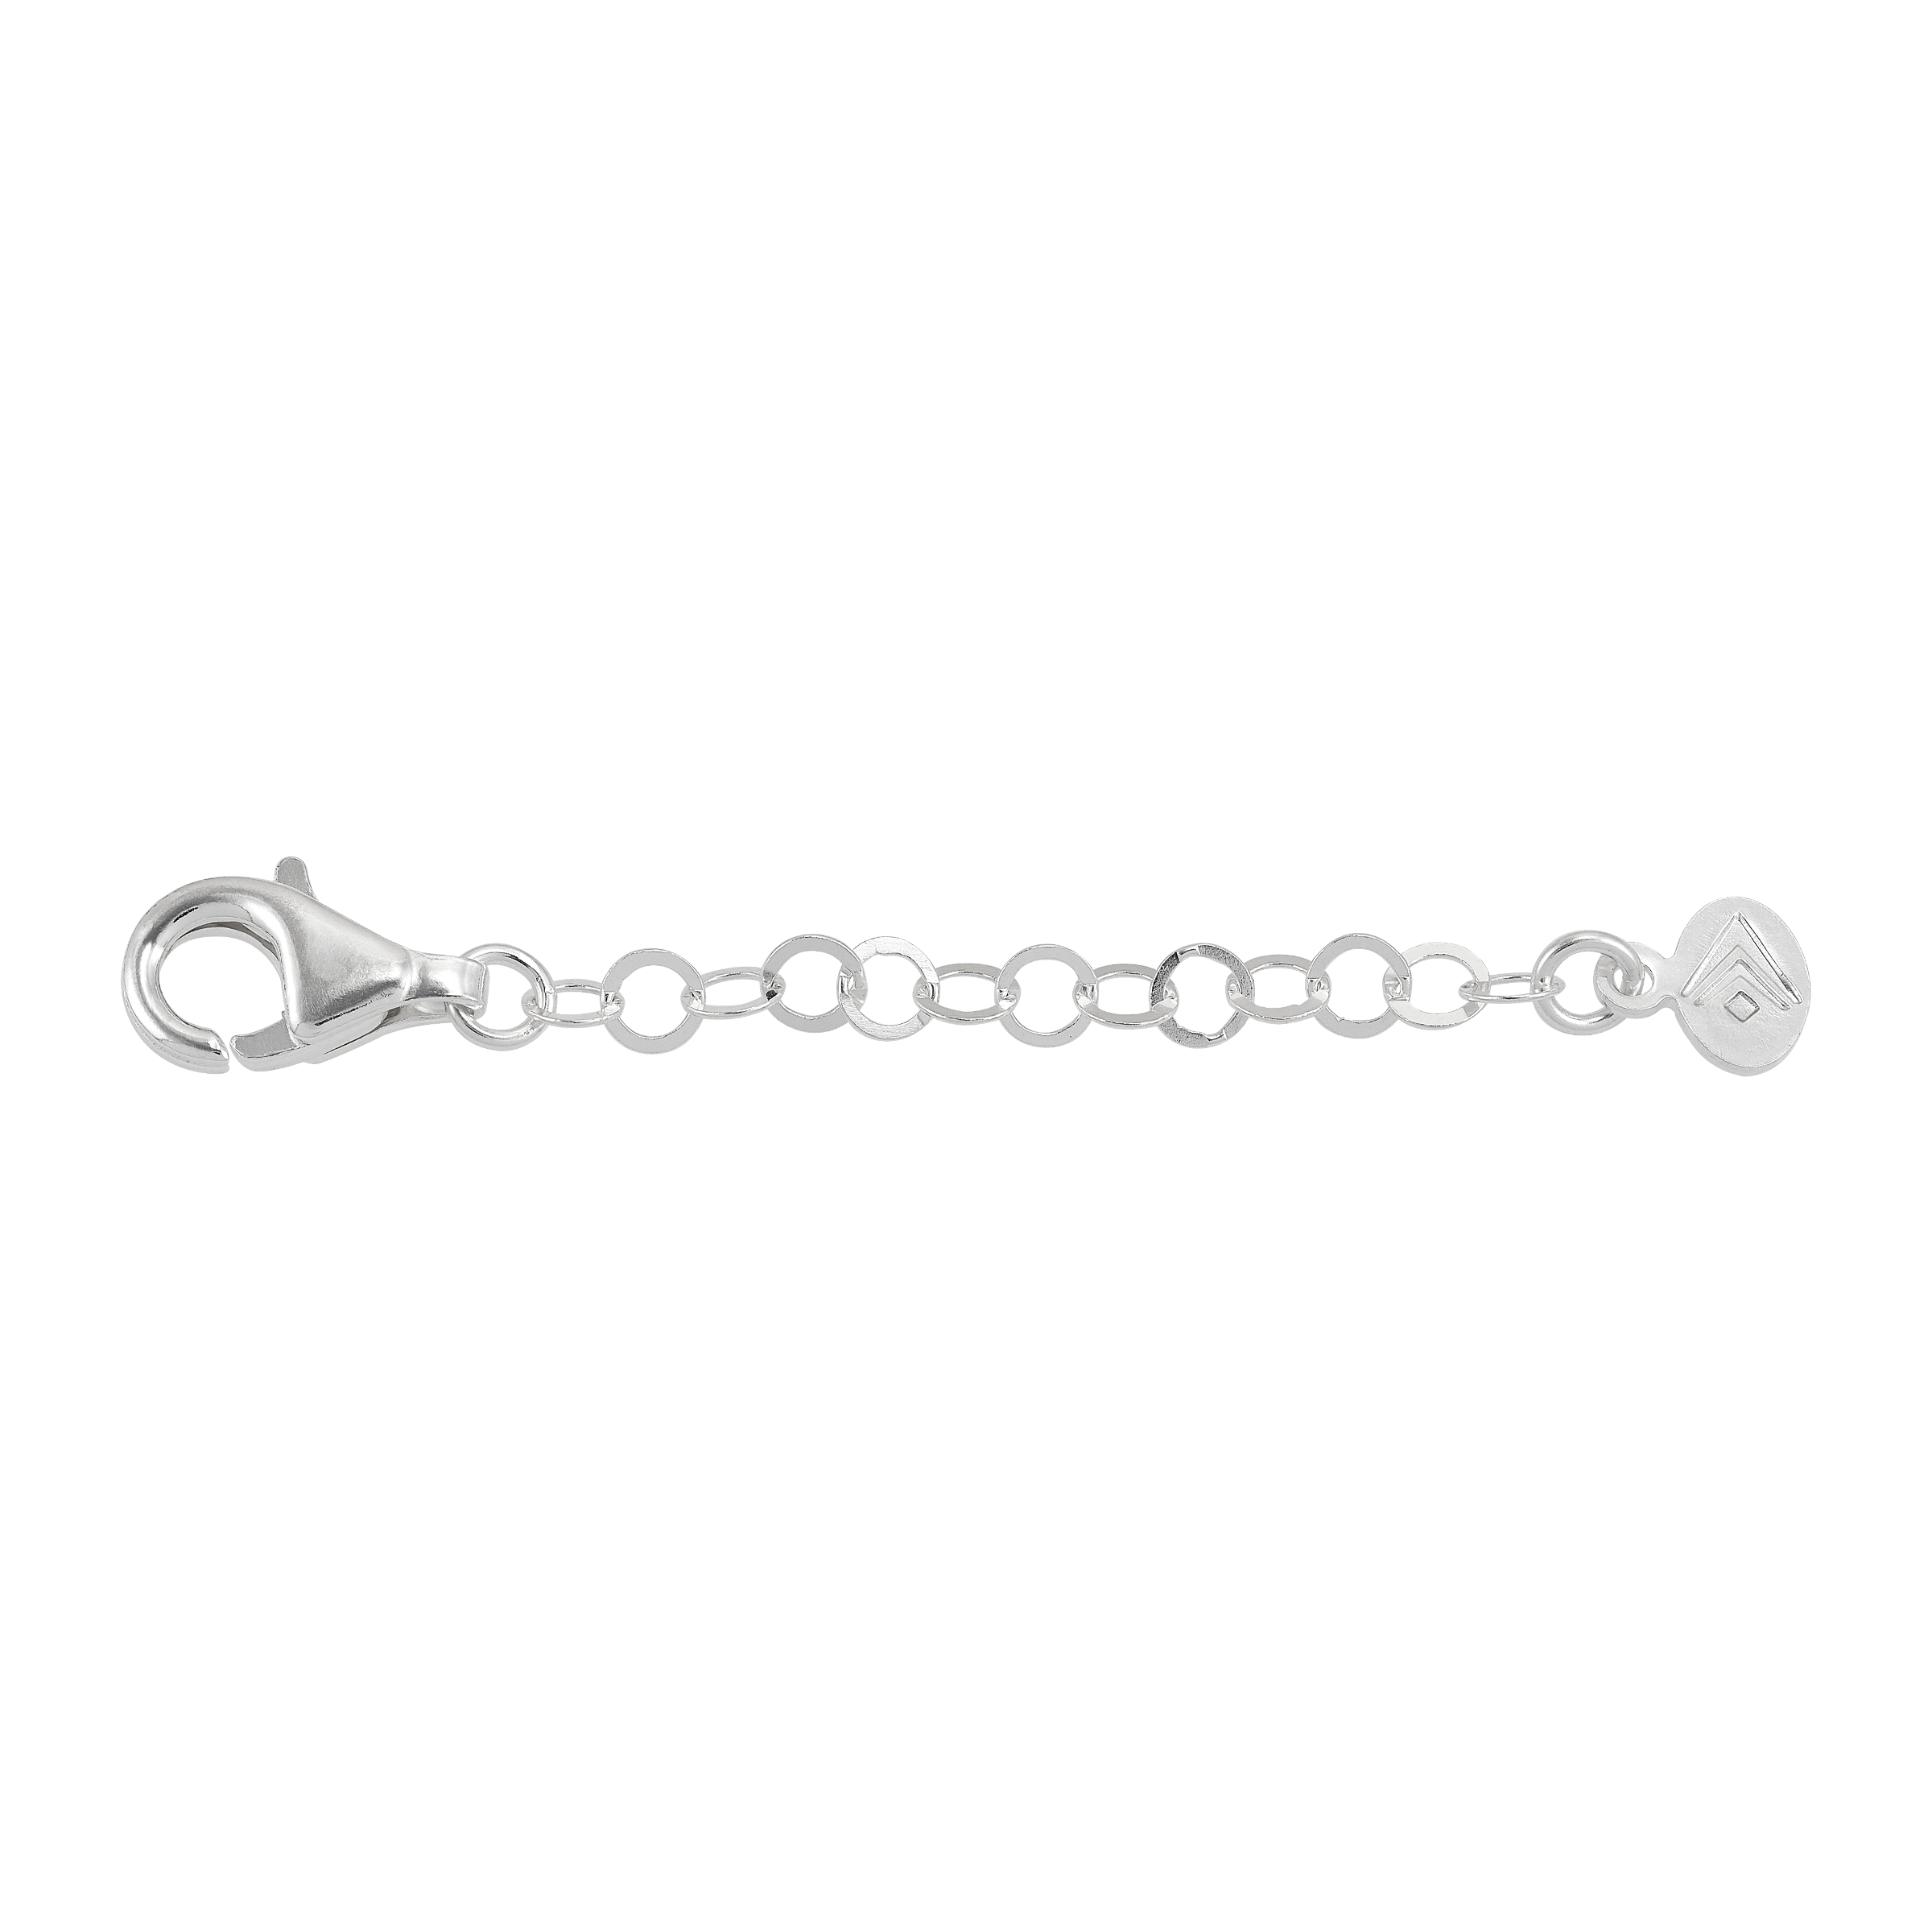  PATIKIL 2 Inch S925 Silver Necklace Extender, 2 Pack